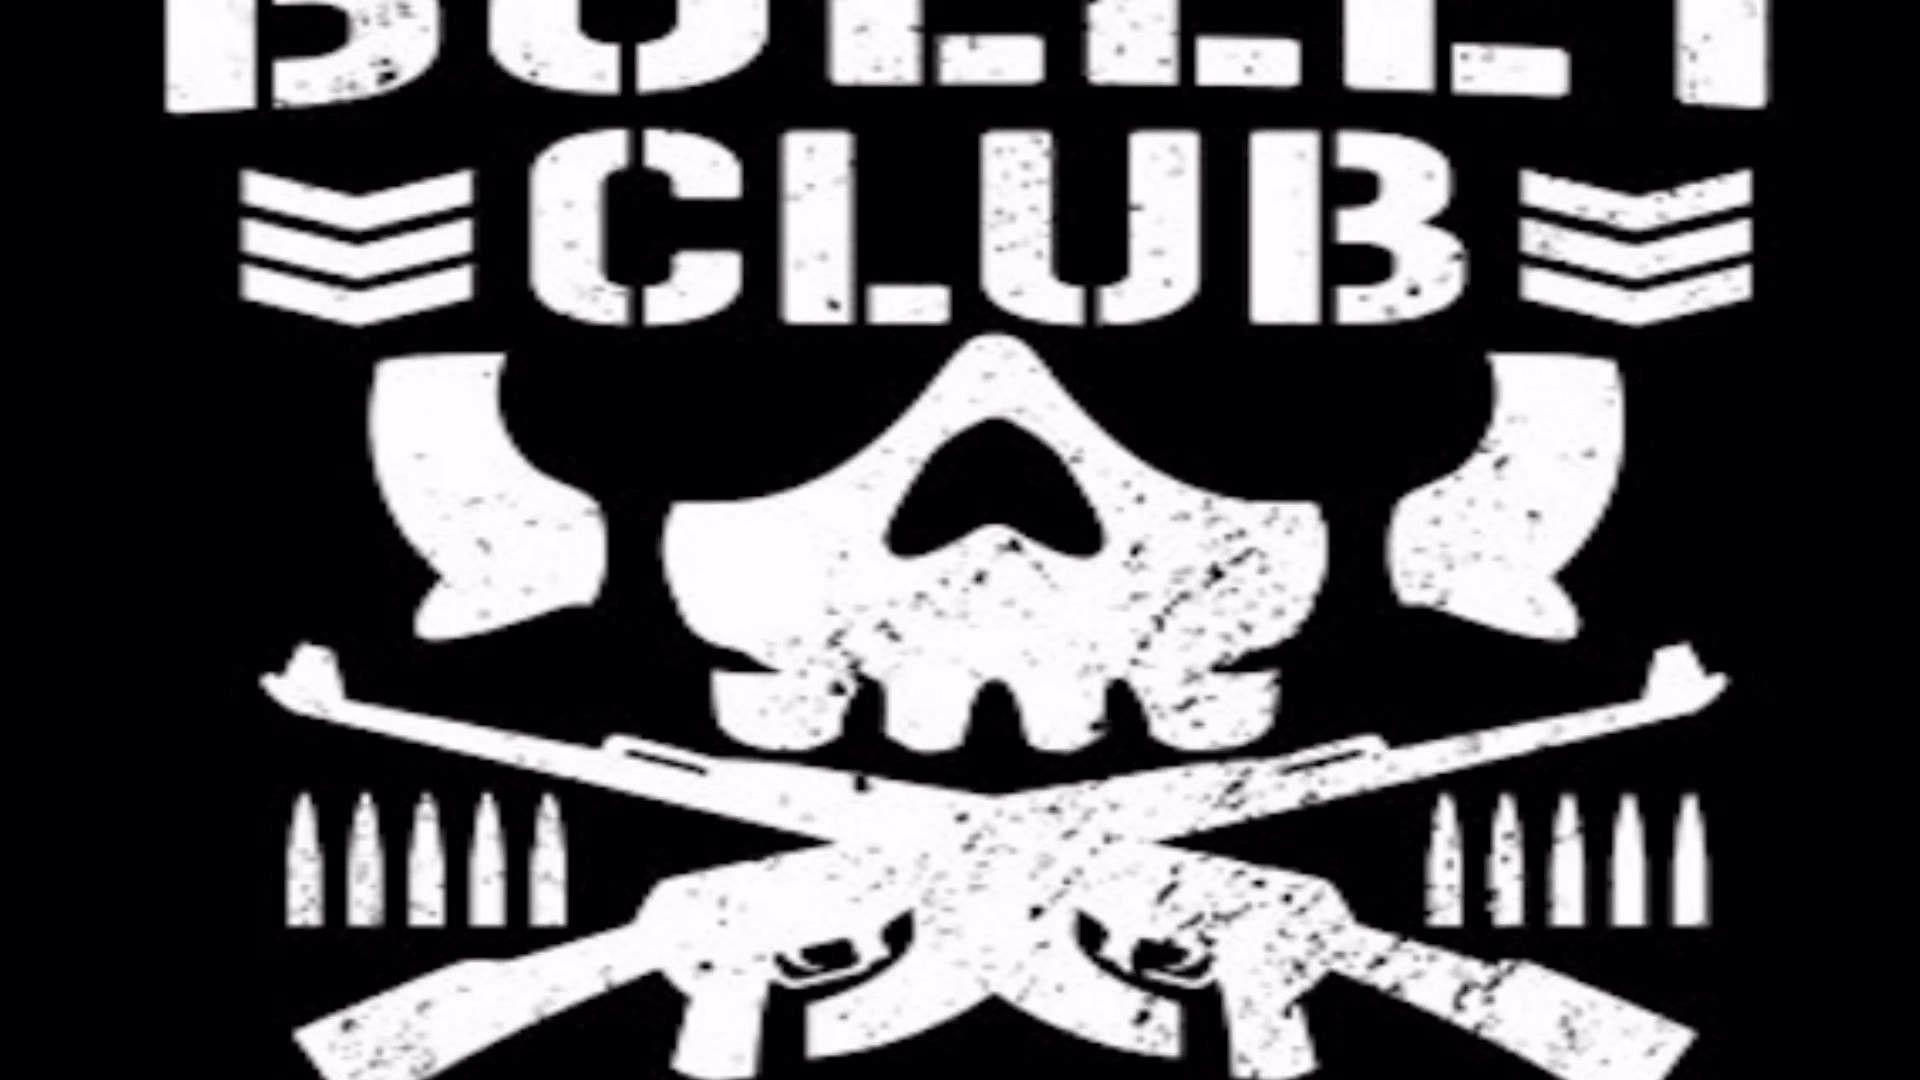 Camo Bullet Club Logo - 71+ Bullet Club Wallpapers on WallpaperPlay